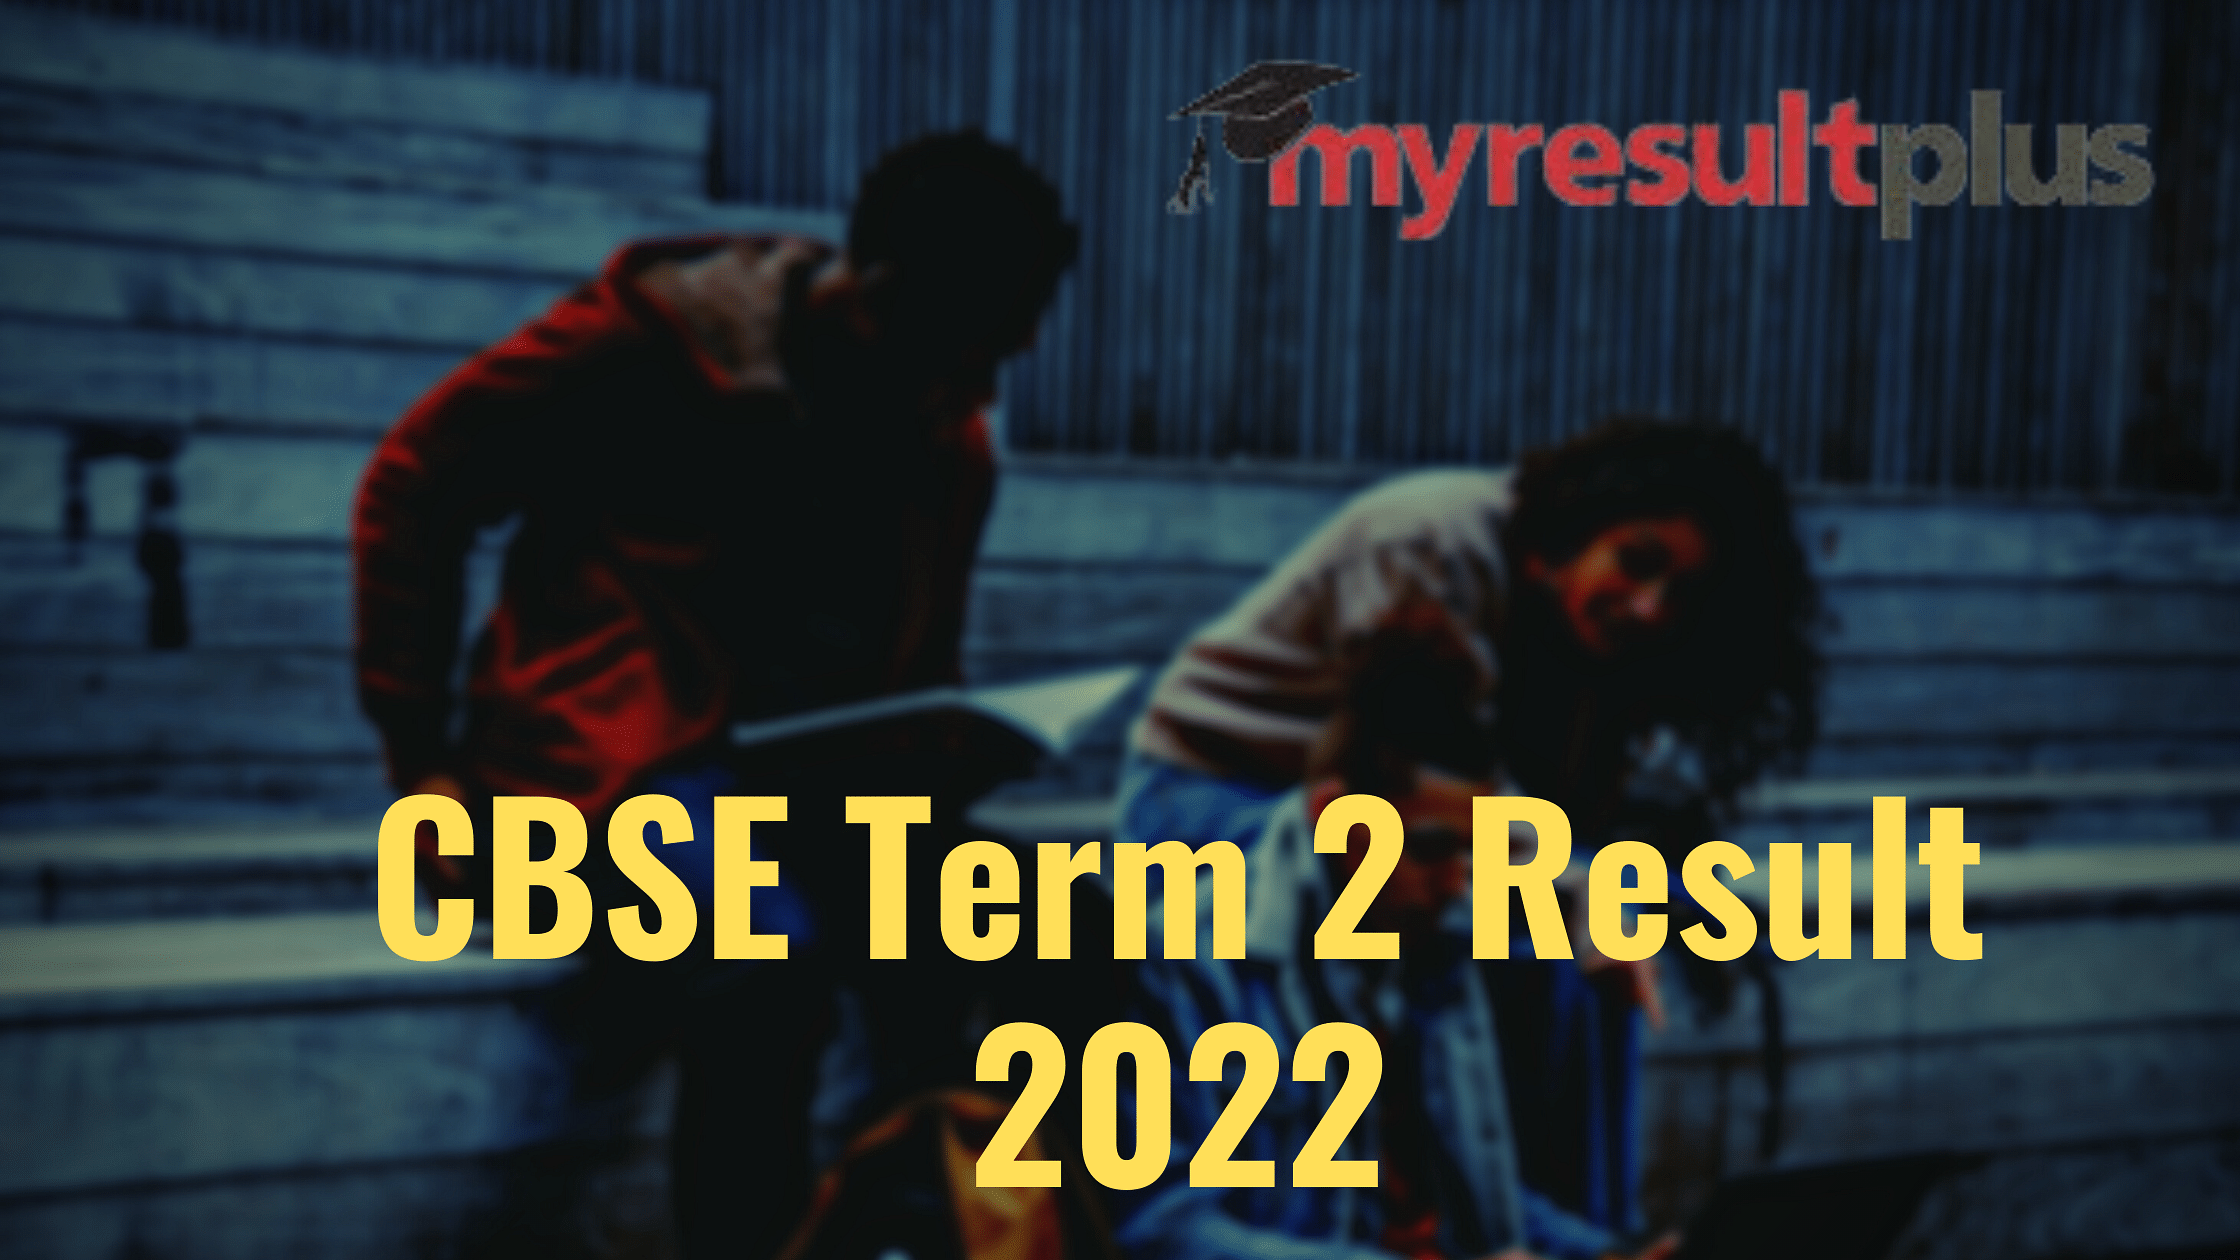 CBSE Term 2 Result 2022: Students On Tenterhooks Despite UGC's Notice to HEIs, Result Likely By July End